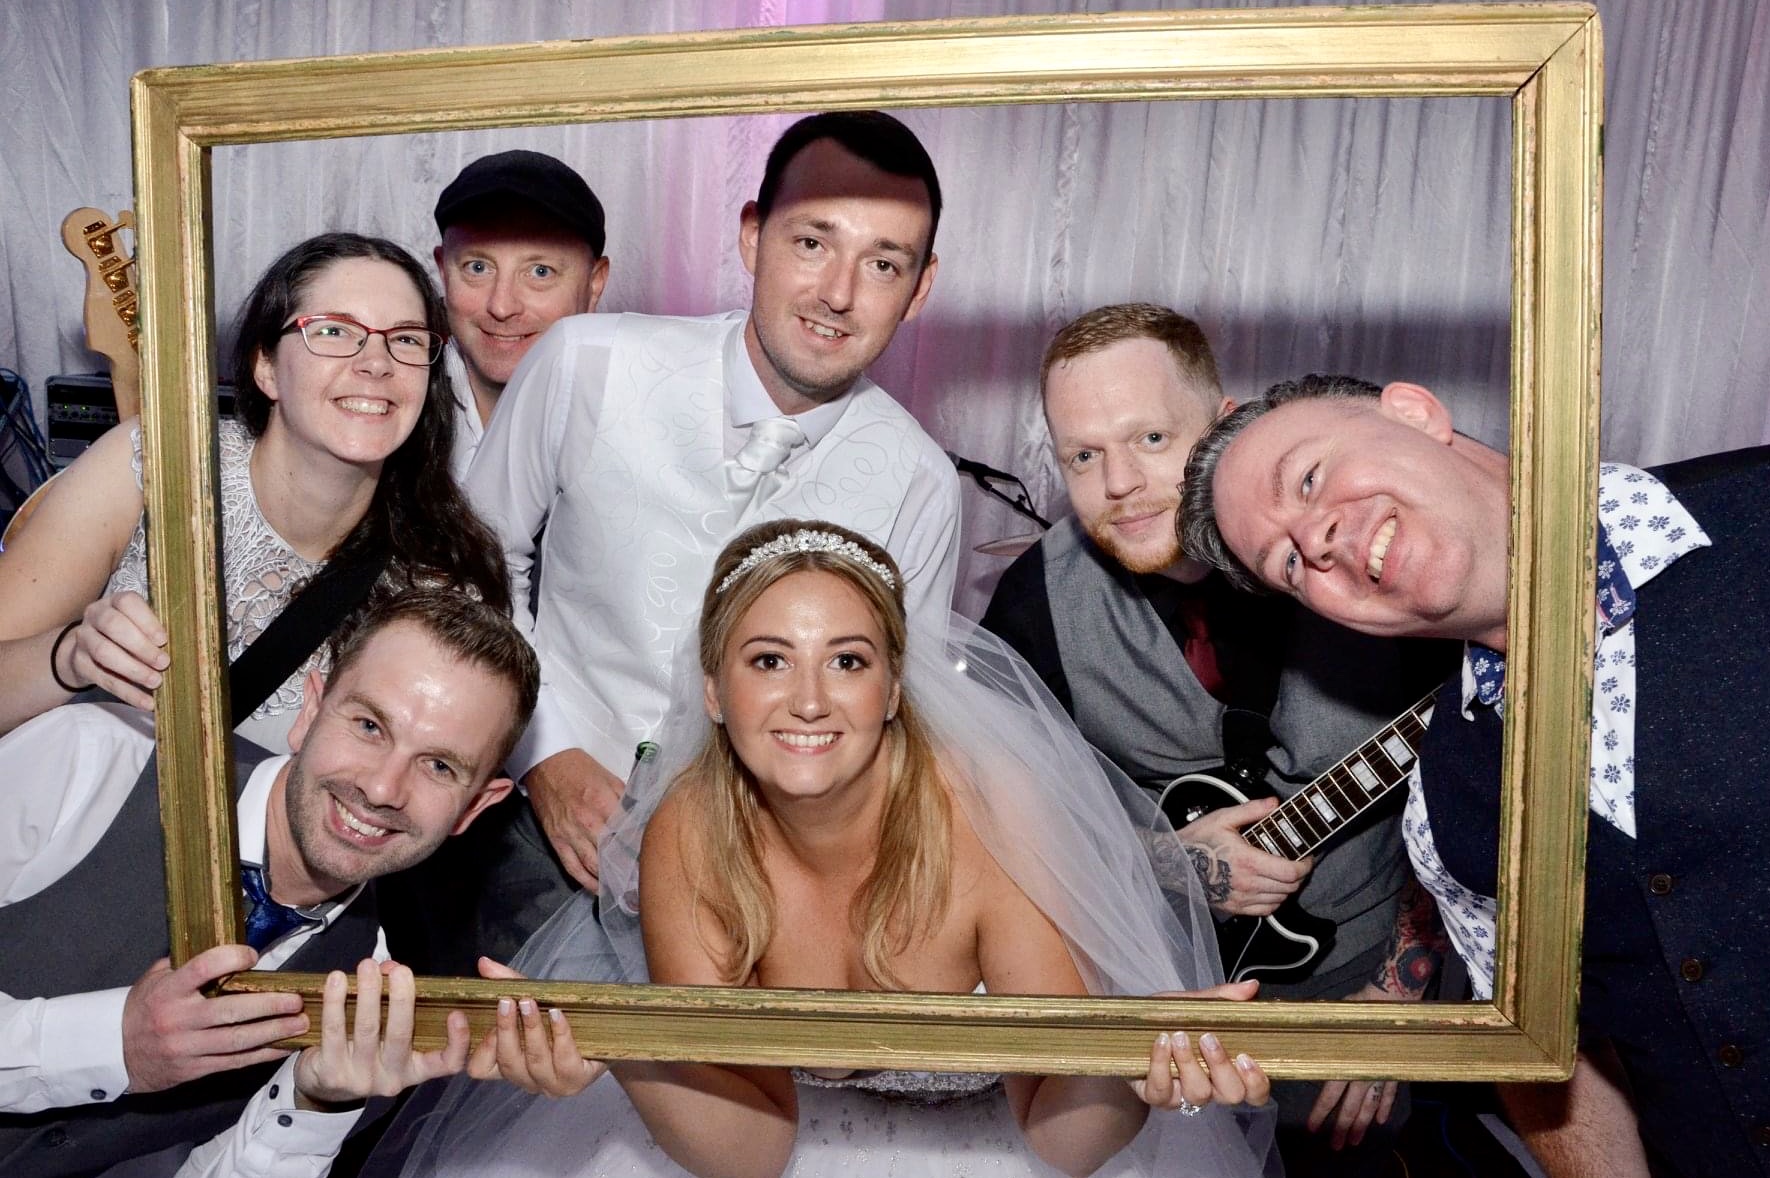 All smiles: IndieFly band hold a very large wooden pricture frame that frames a beautiful blonde bride in her wedding dress next to her groom. The band lean into the frame all around them.